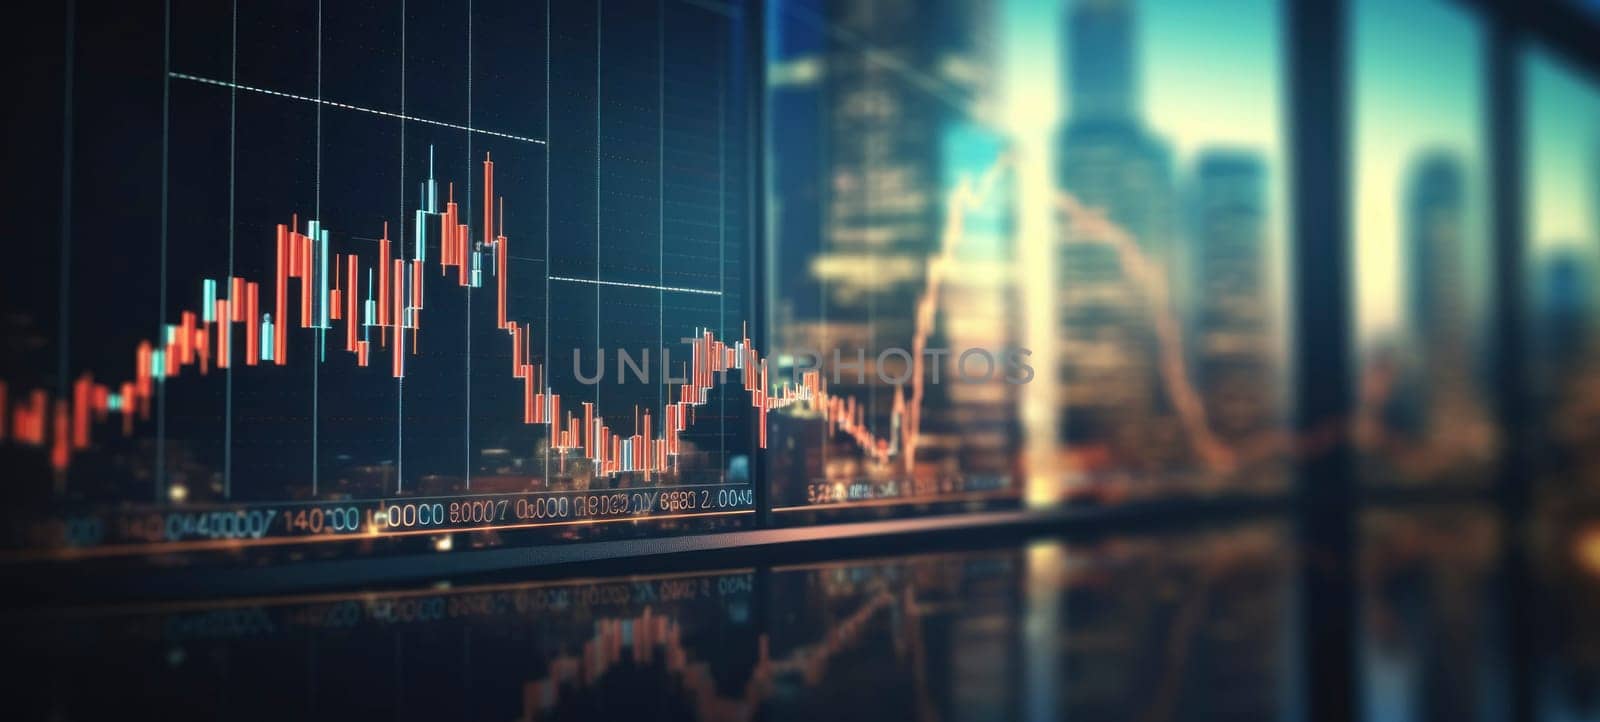 Stock market investment graph with candlestick chart overlay on a blurred urban cityscape background.